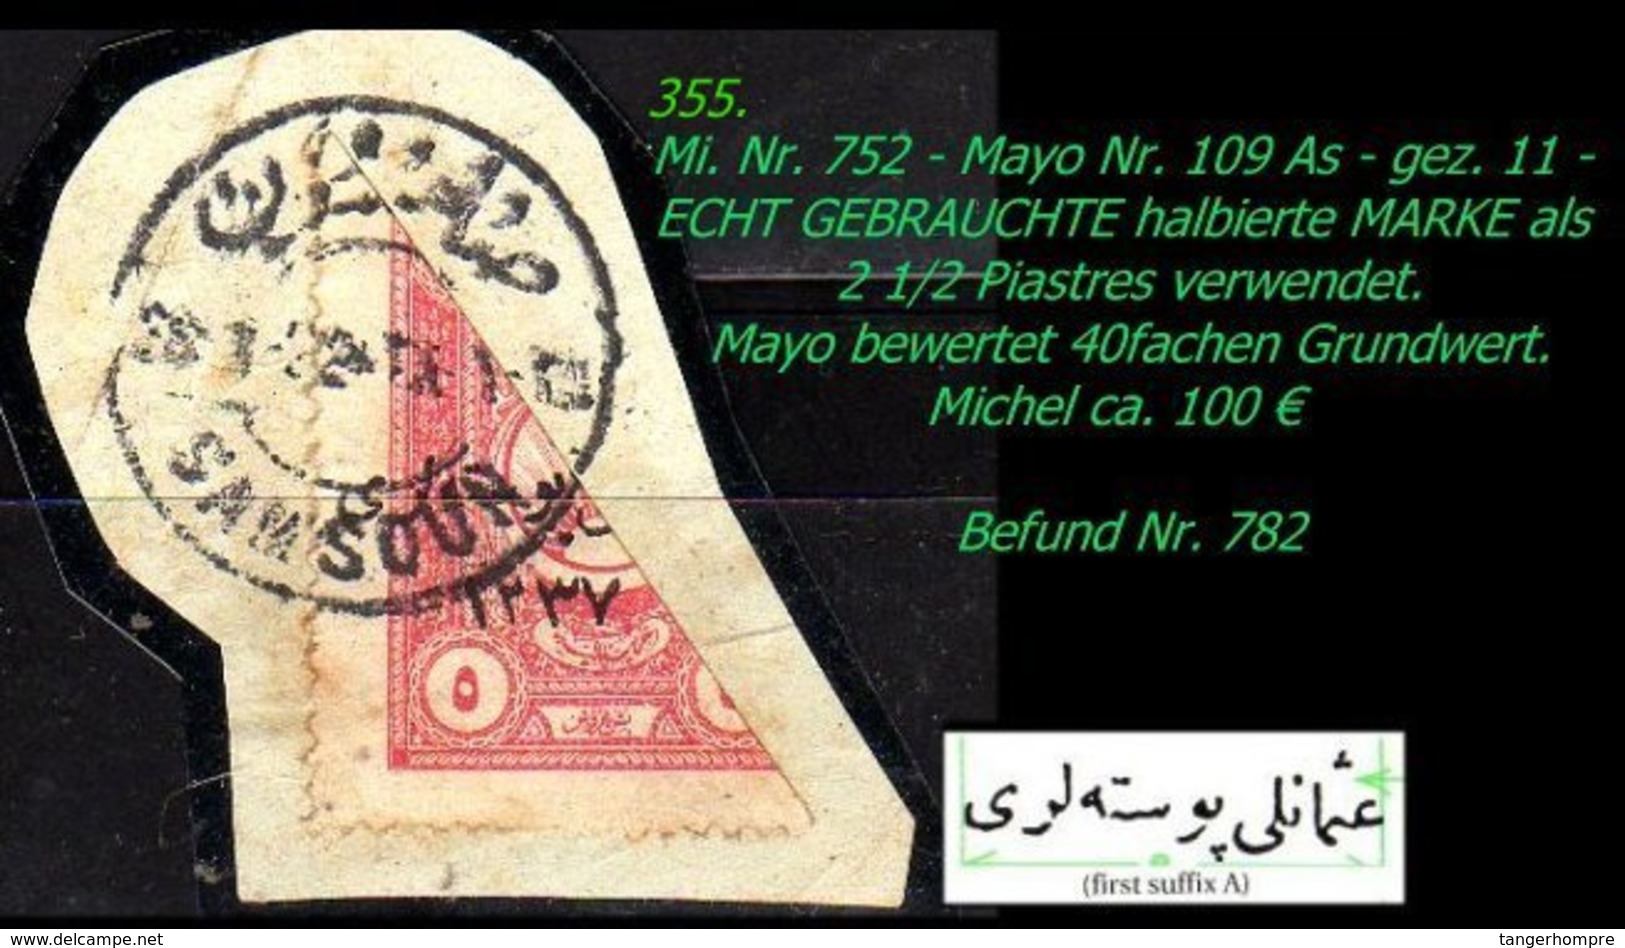 EARLY OTTOMAN SPECIALIZED FOR SPECIALIST, SEE...Mi. Nr. 752 - Mayo 109 As - Halbierung -R- - 1920-21 Anatolia